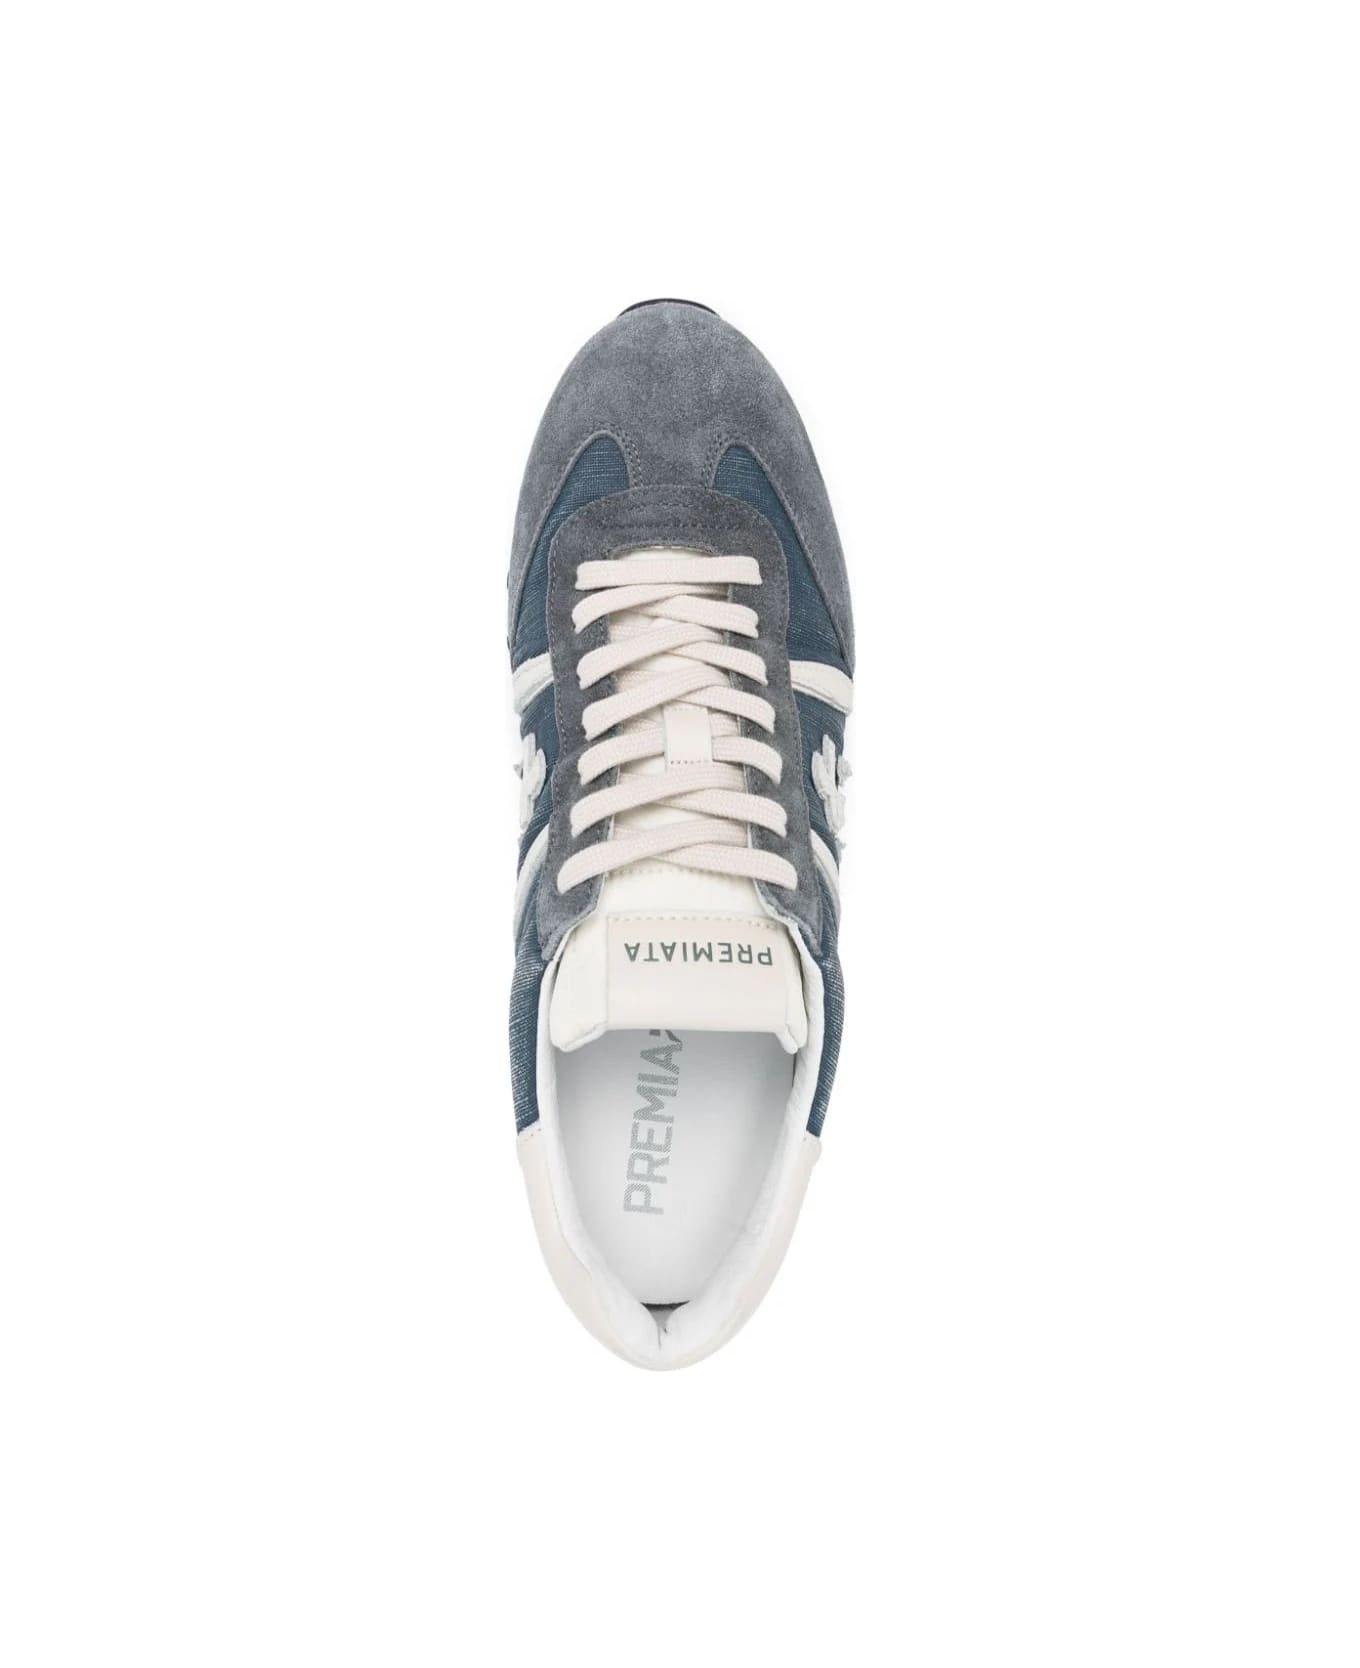 Premiata Lucy 6620 Sneakers - Blue スニーカー